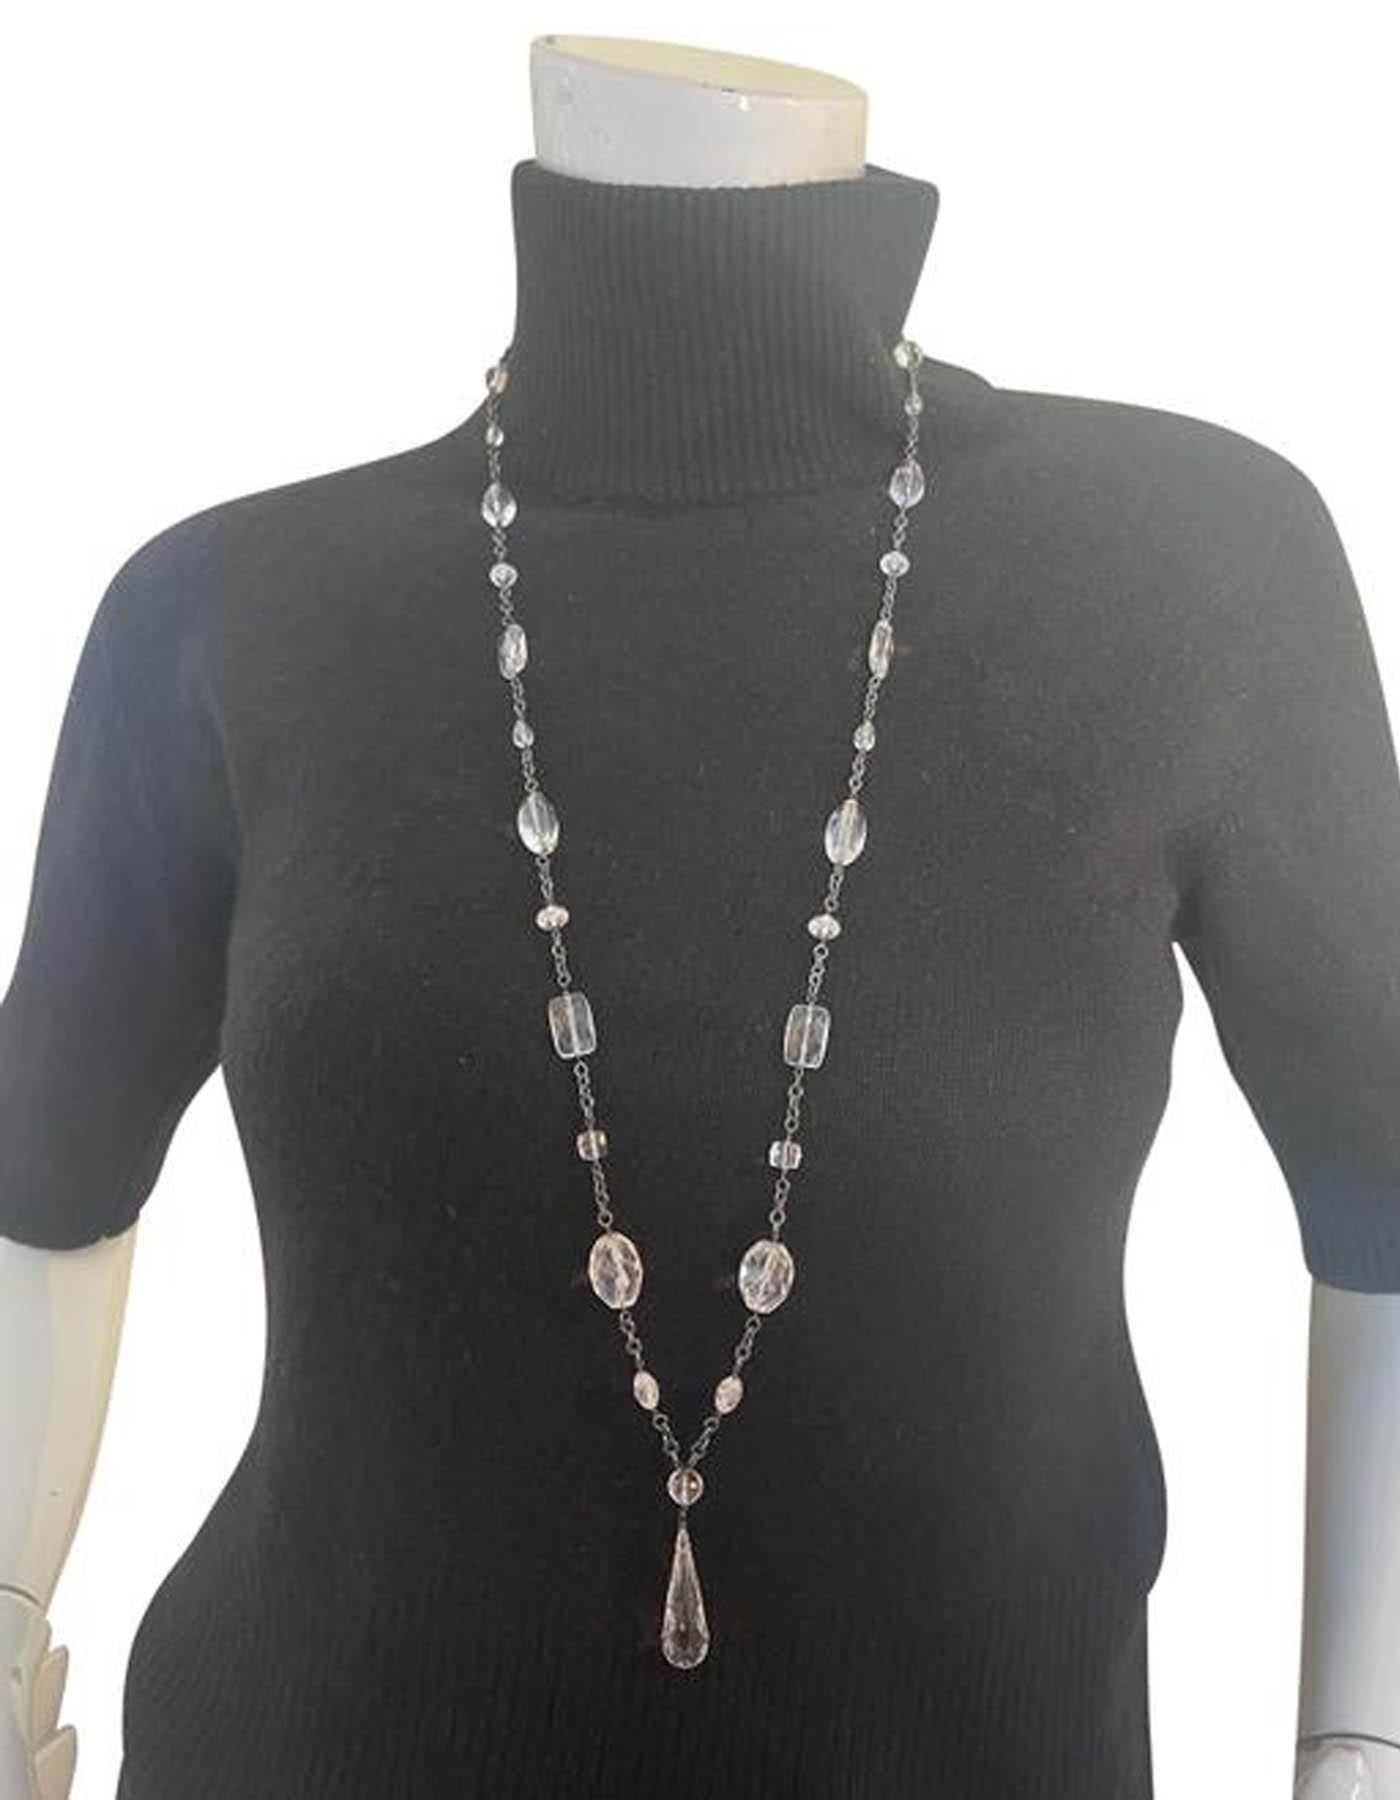 Dana Kellin Oxidized Sterling Silver & Clear Quartz Necklace w/ Tear Drop Y Pendant

Materials: Oxidized sterling silver and clear quartz
Closure/Opening: Toggle
Overall Condition: Excellent

Measurements:
Length: 34